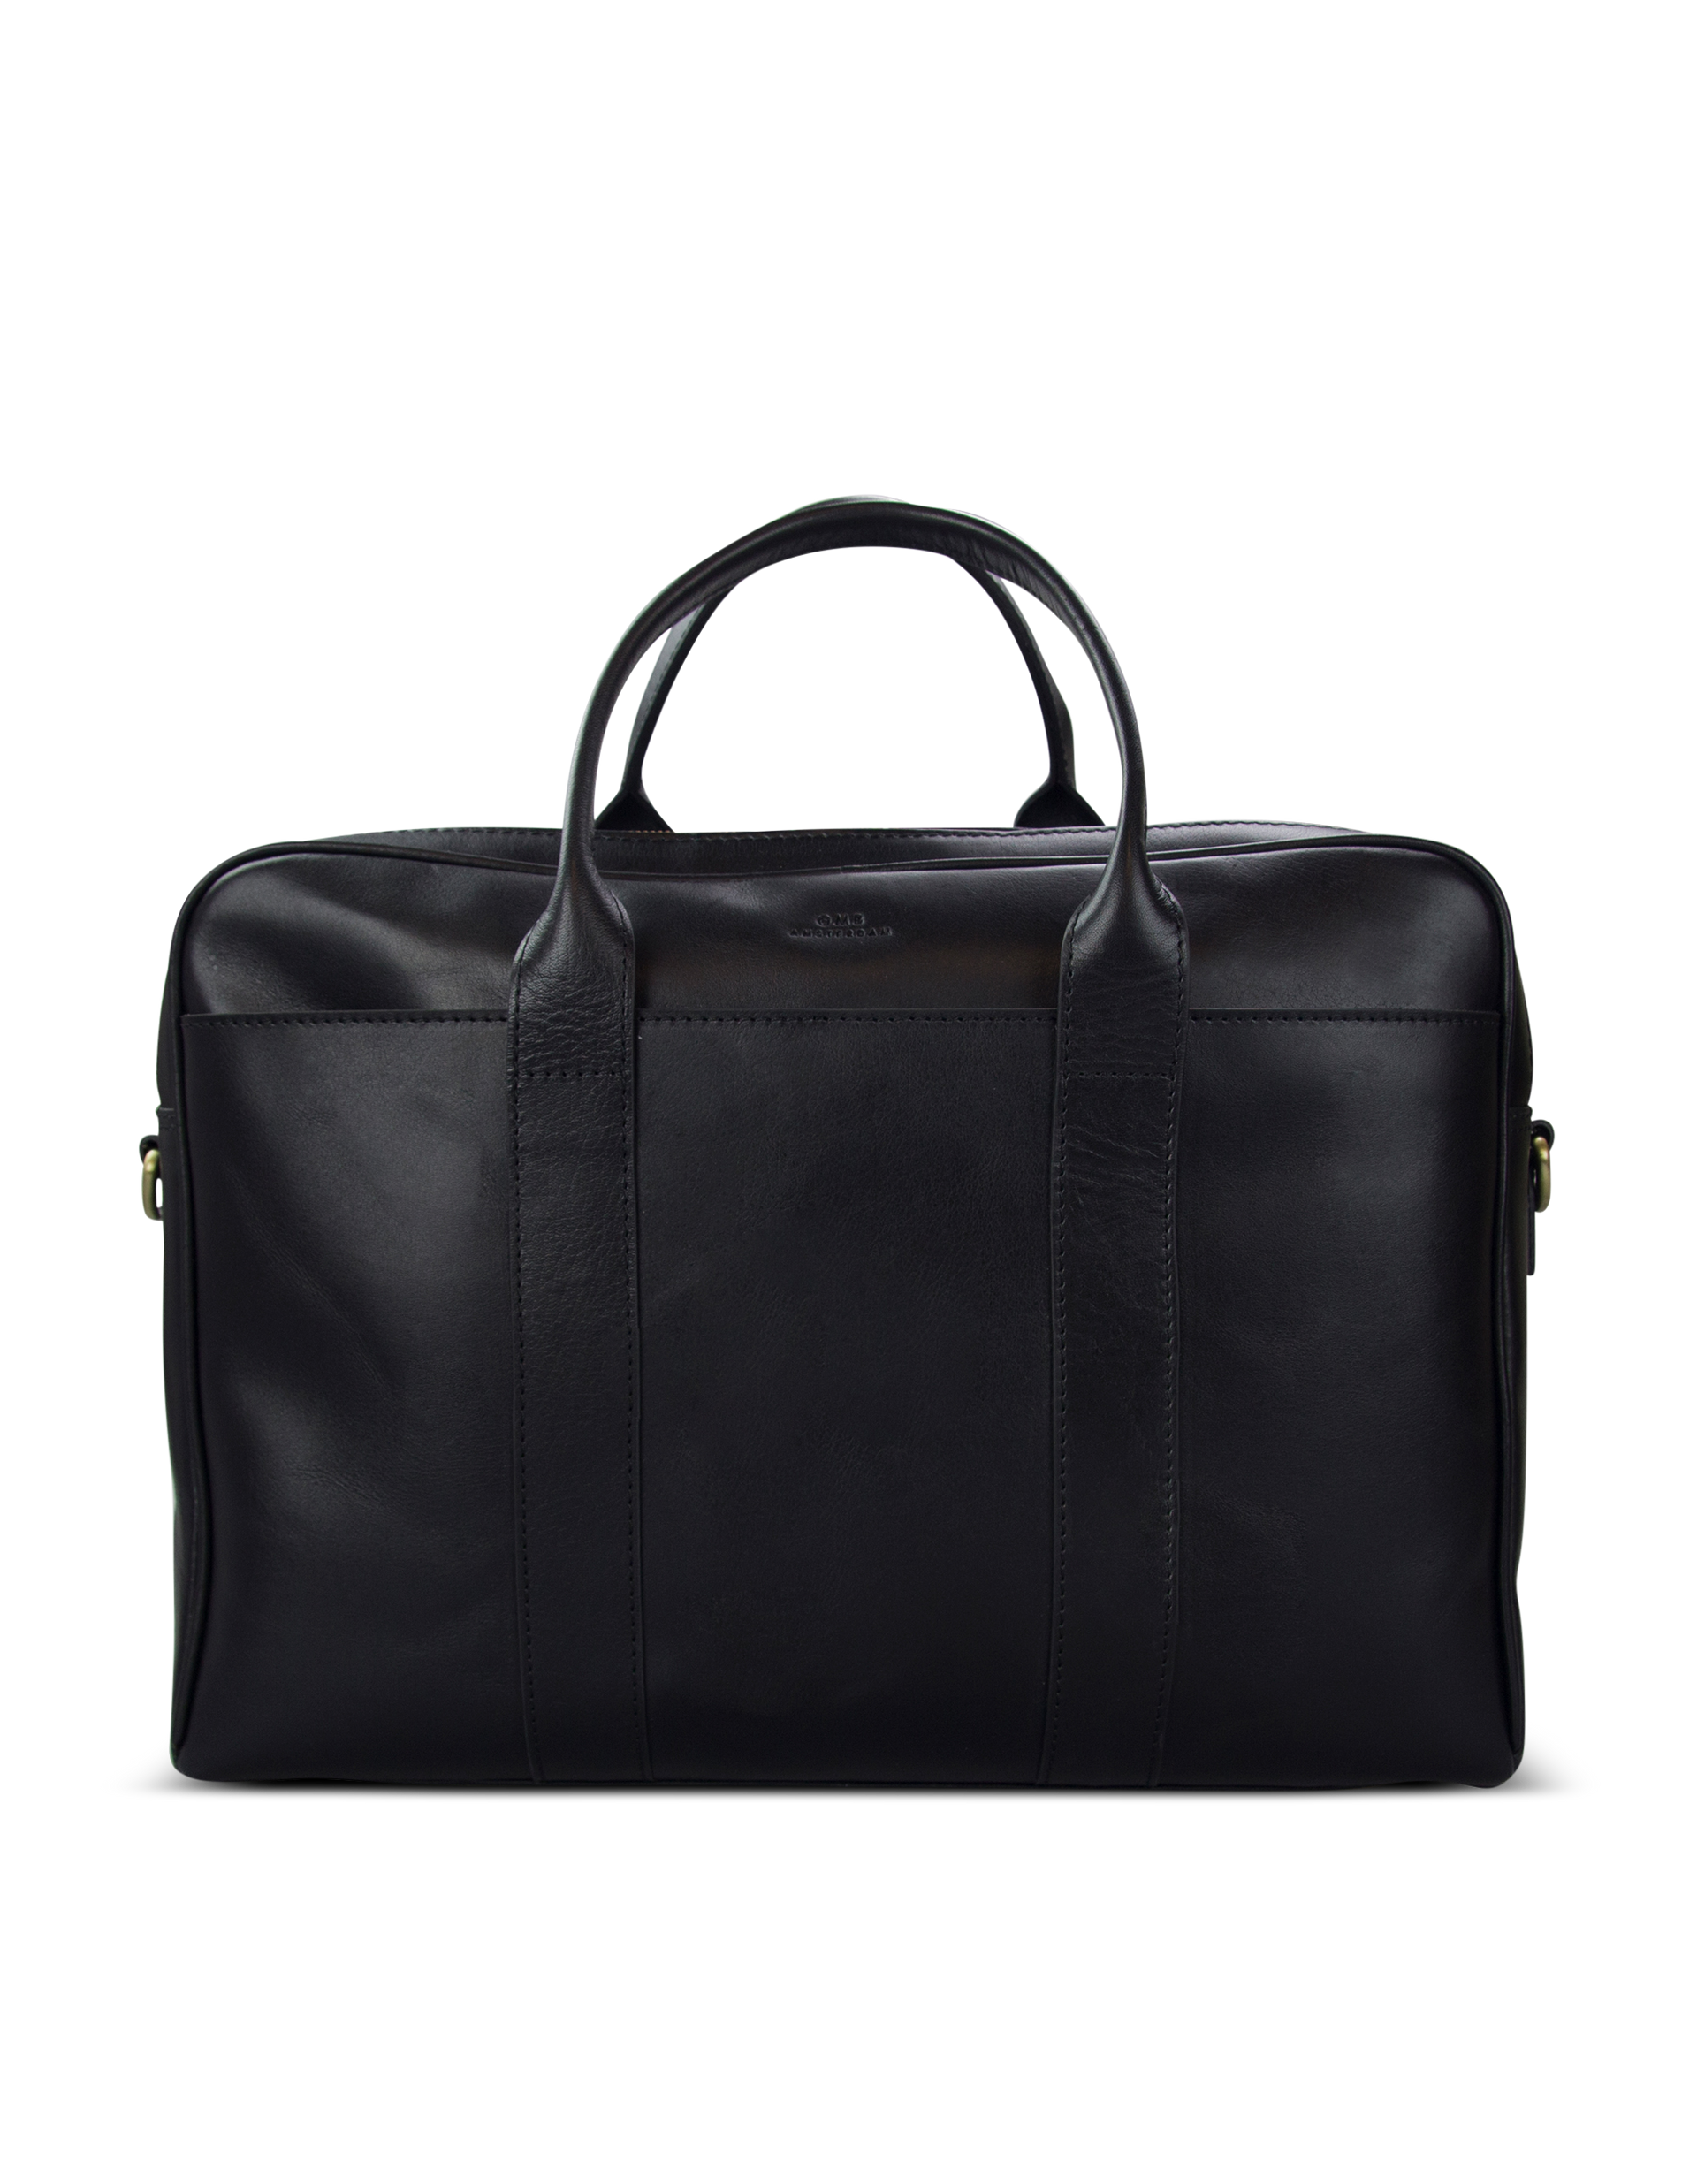 Black Leather business bag. Front product image.